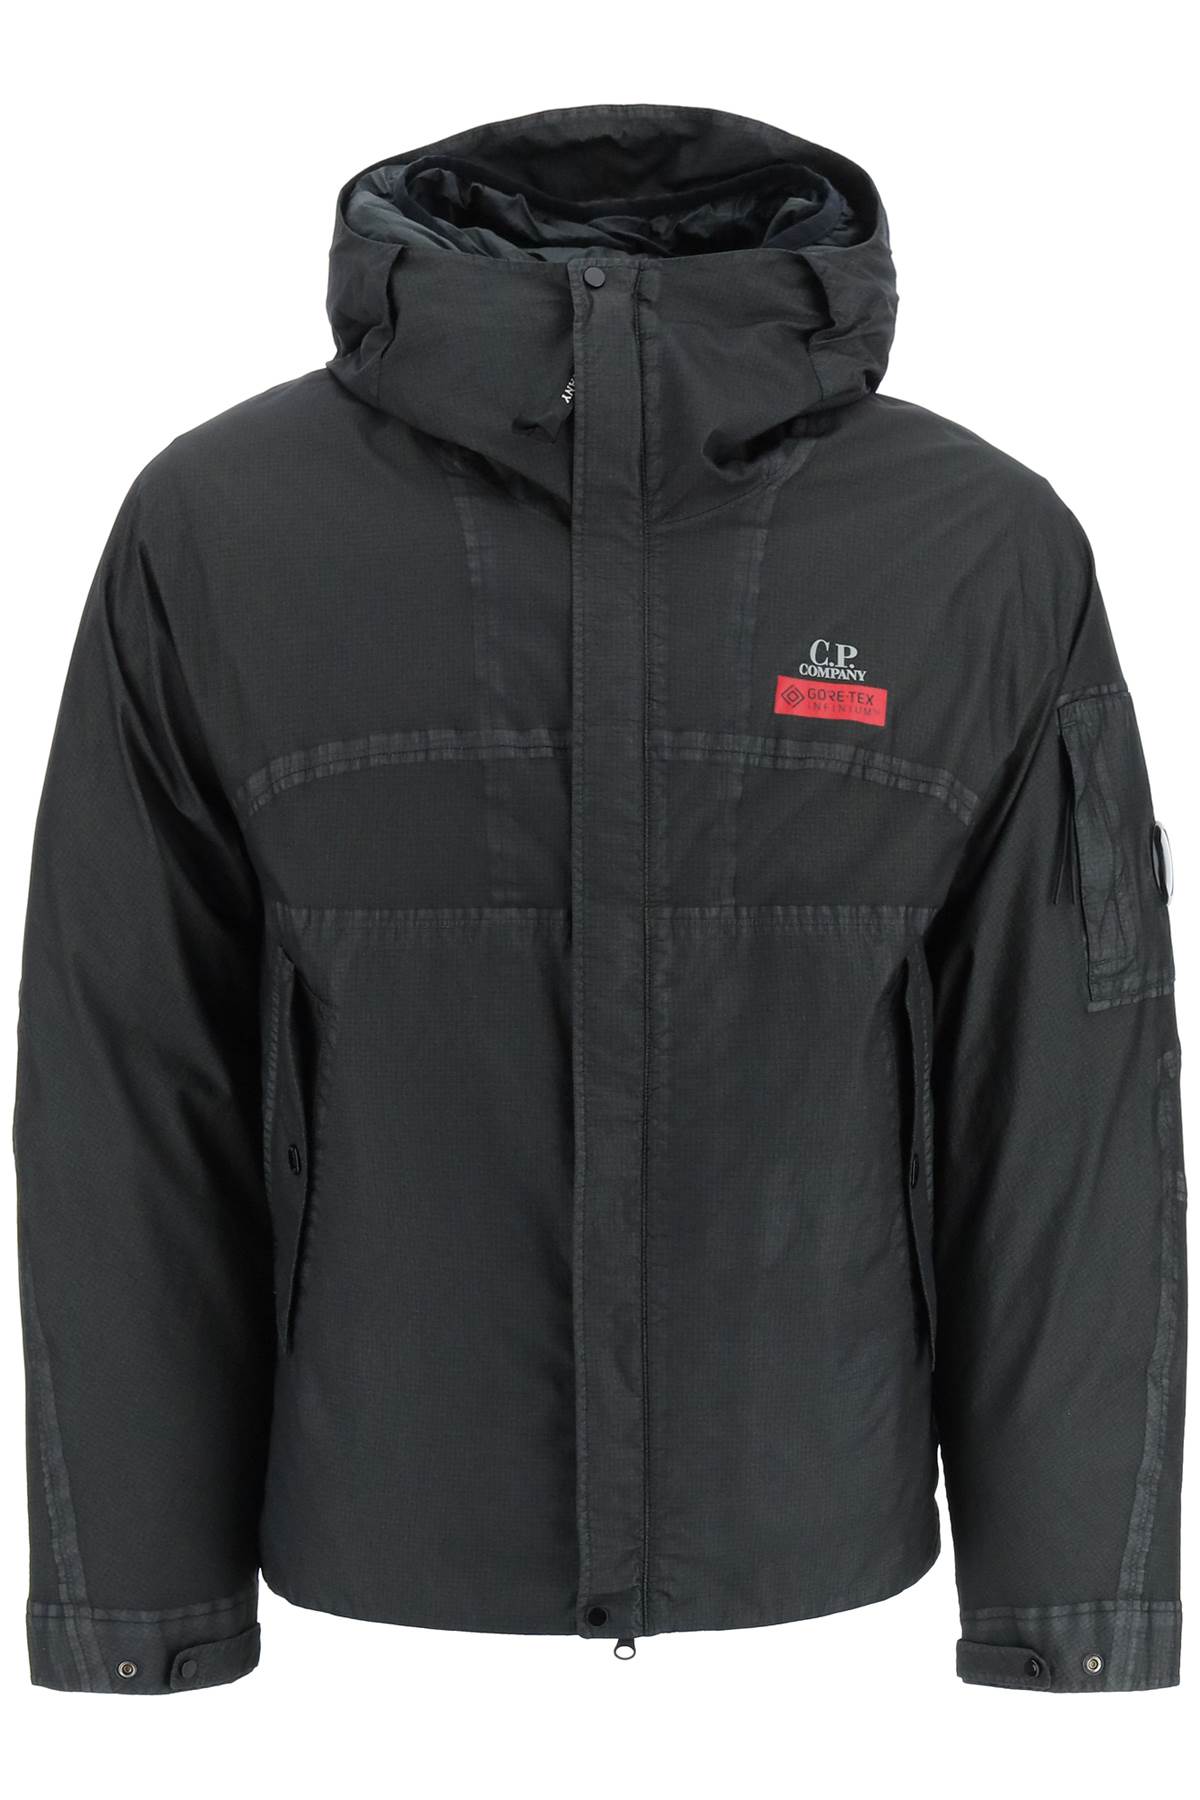 C.P. Company Gore G-type Hooded Jacket